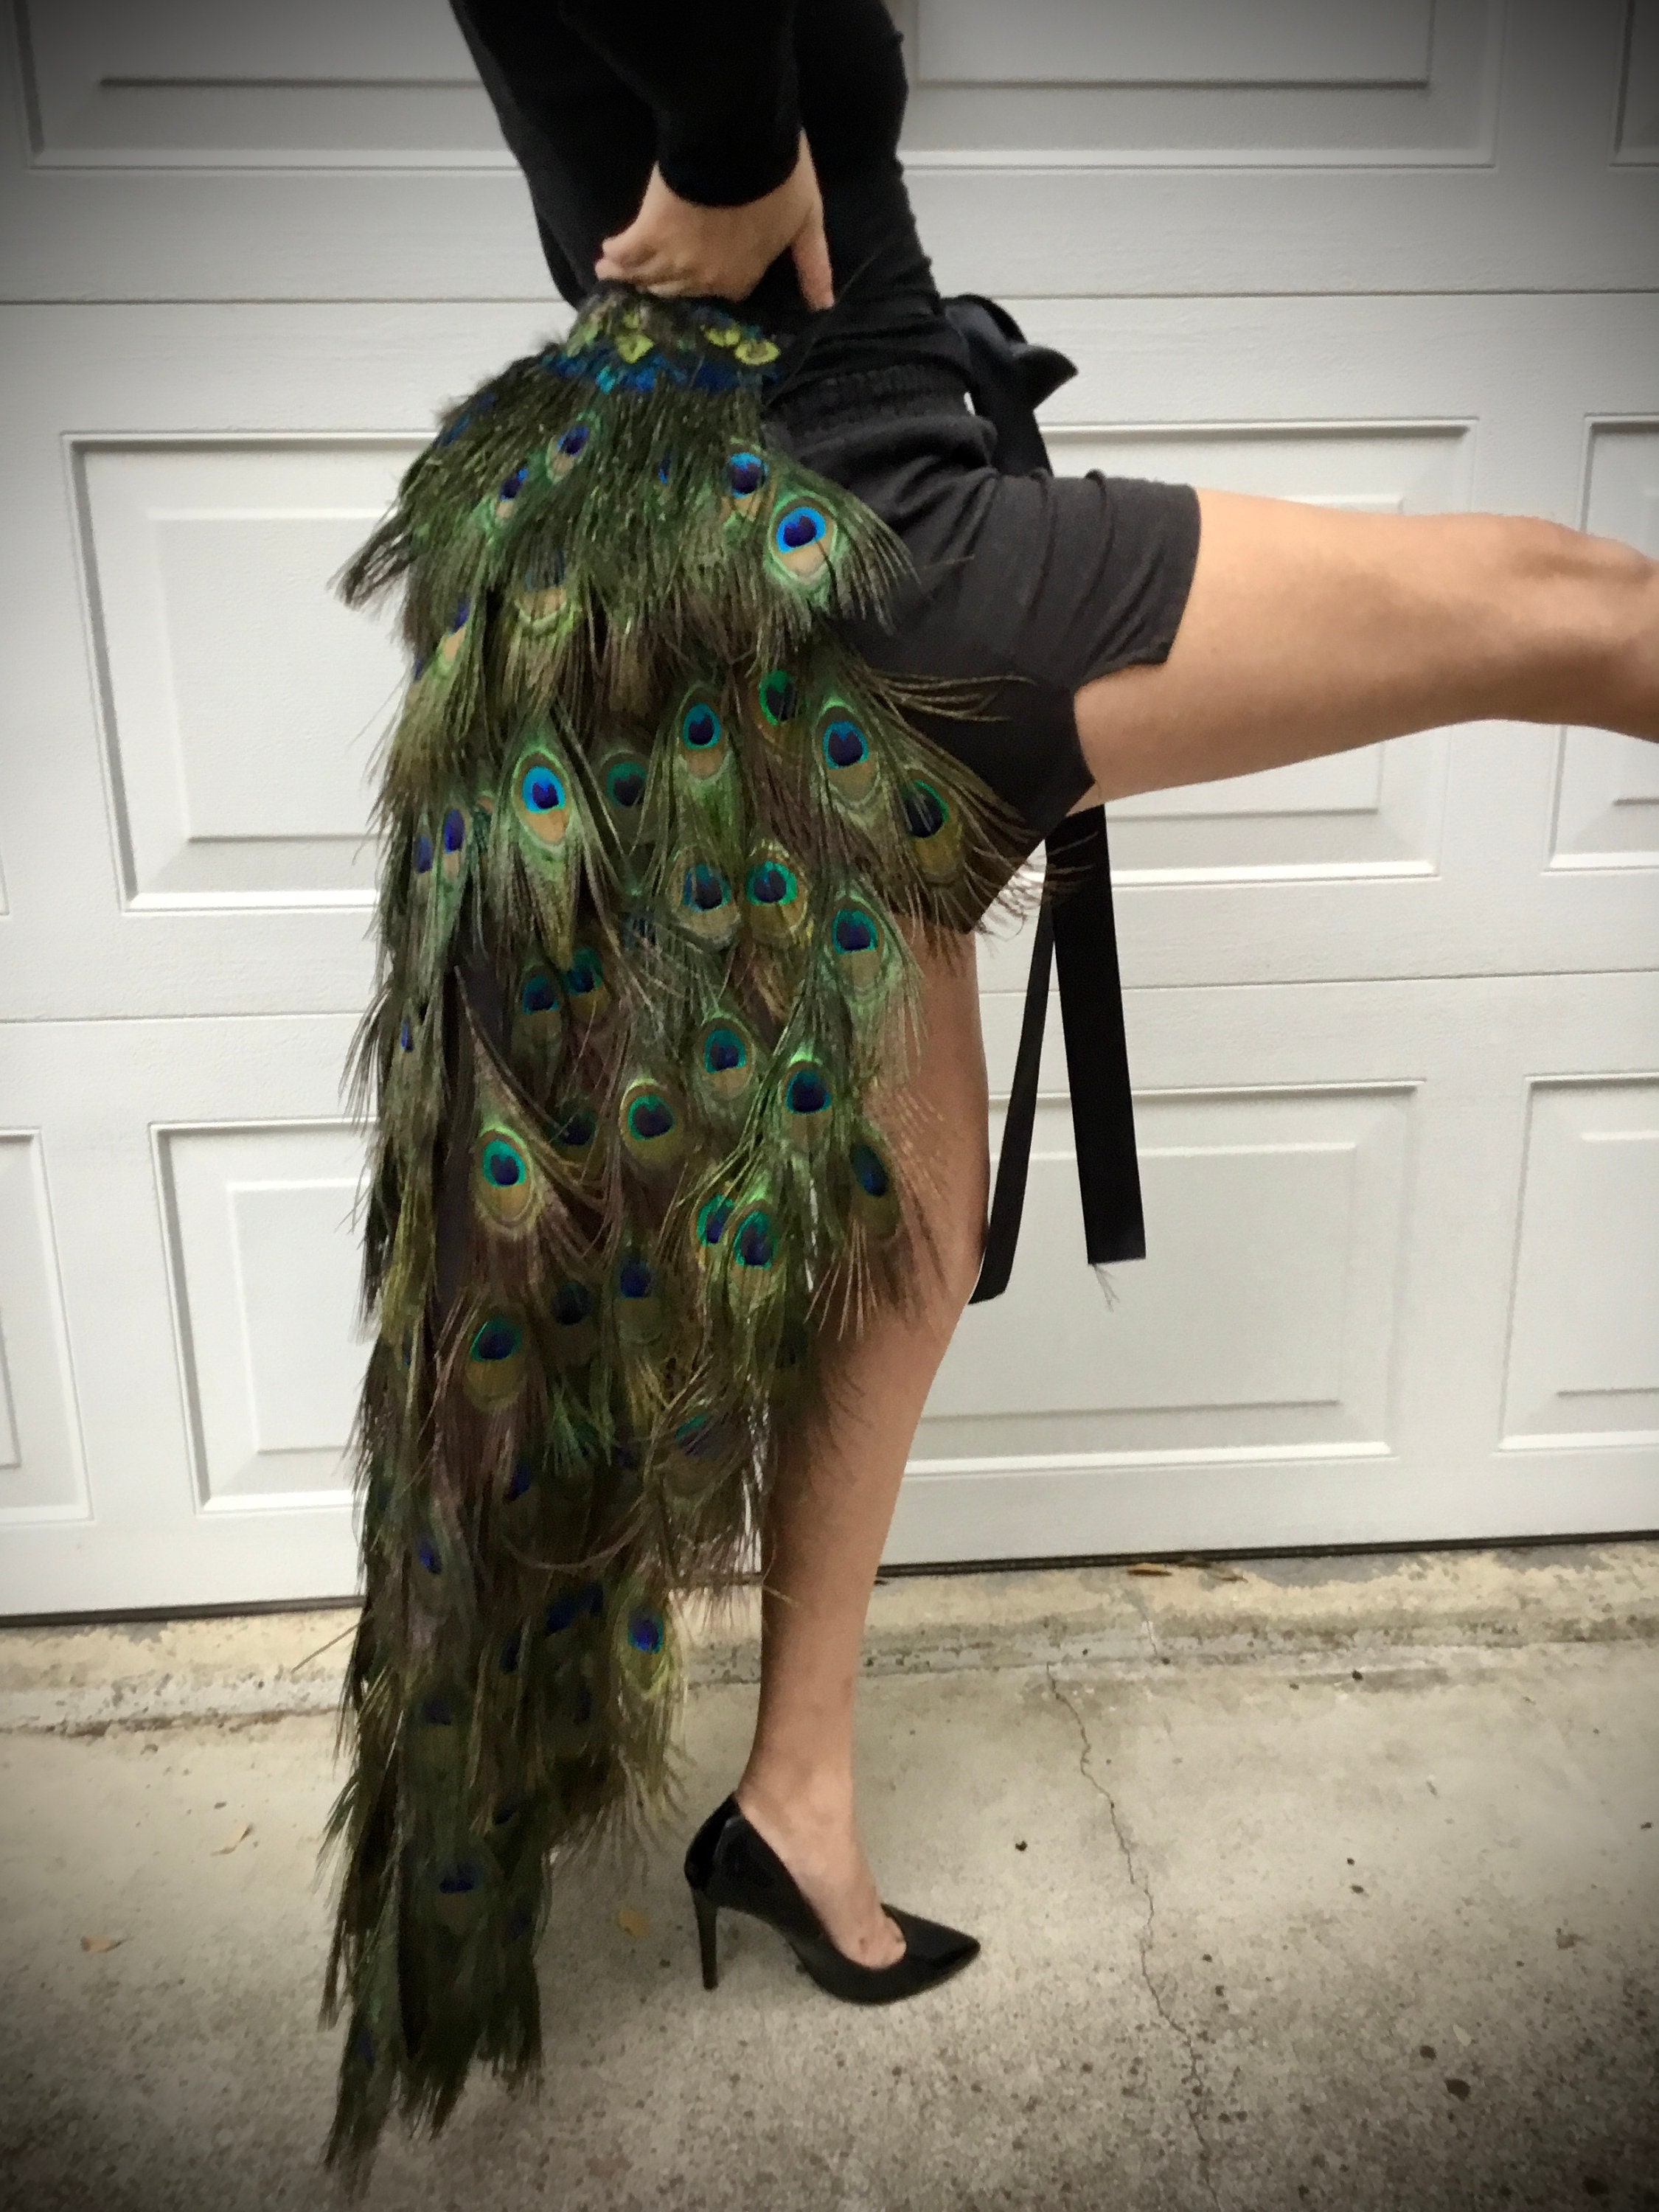 Peacock Feather Tail Costume in Your Choice of Lengths 